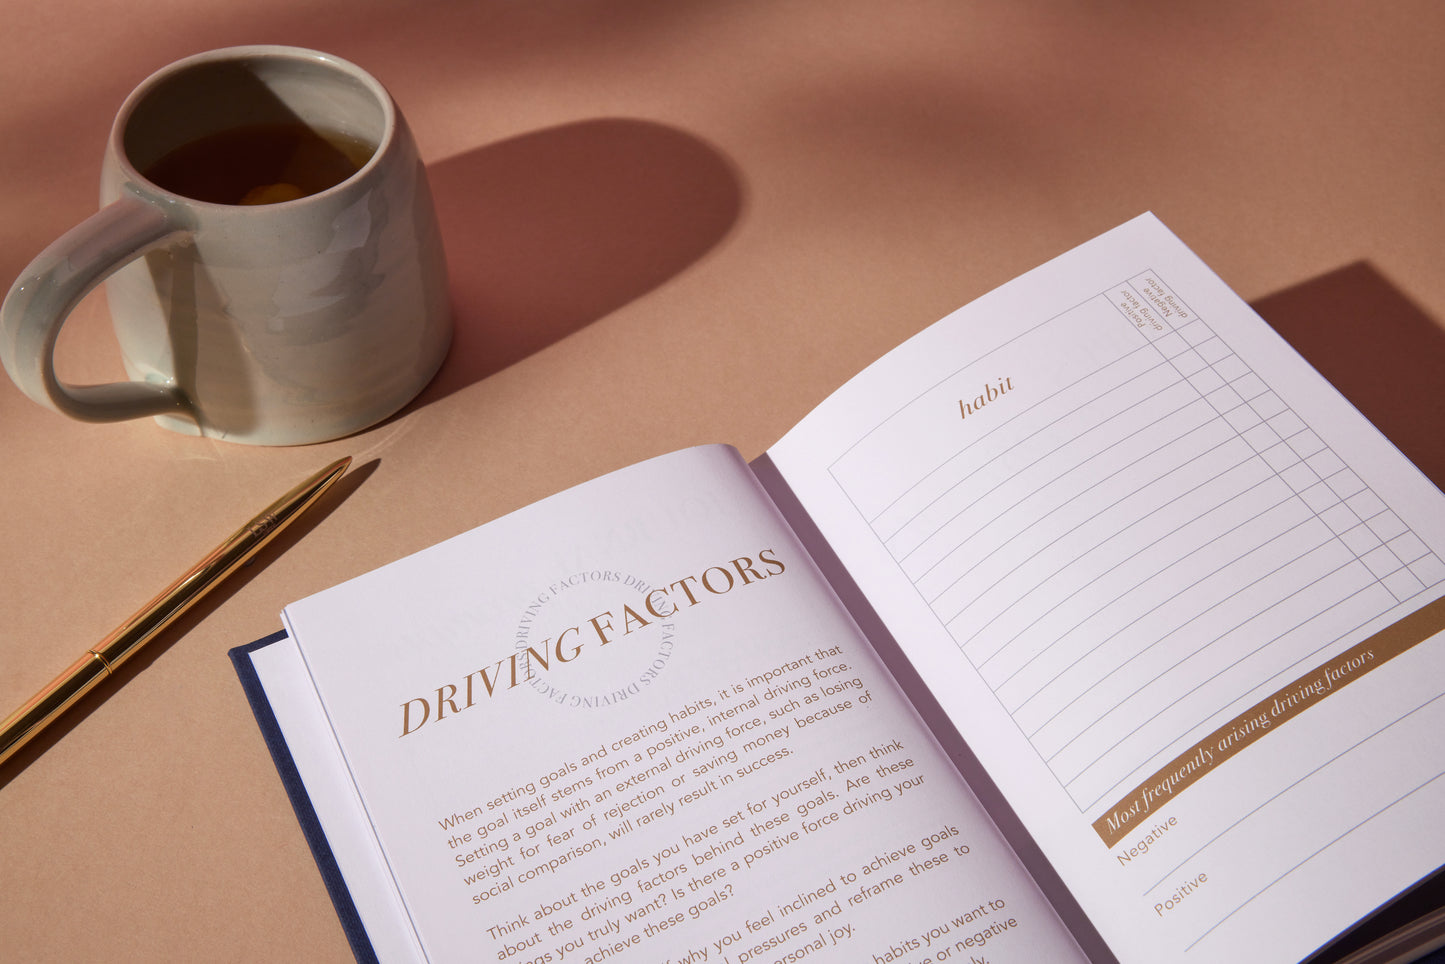 Habit Notes: Daily Habit Tracking Journal & Goal Setting by LSW London